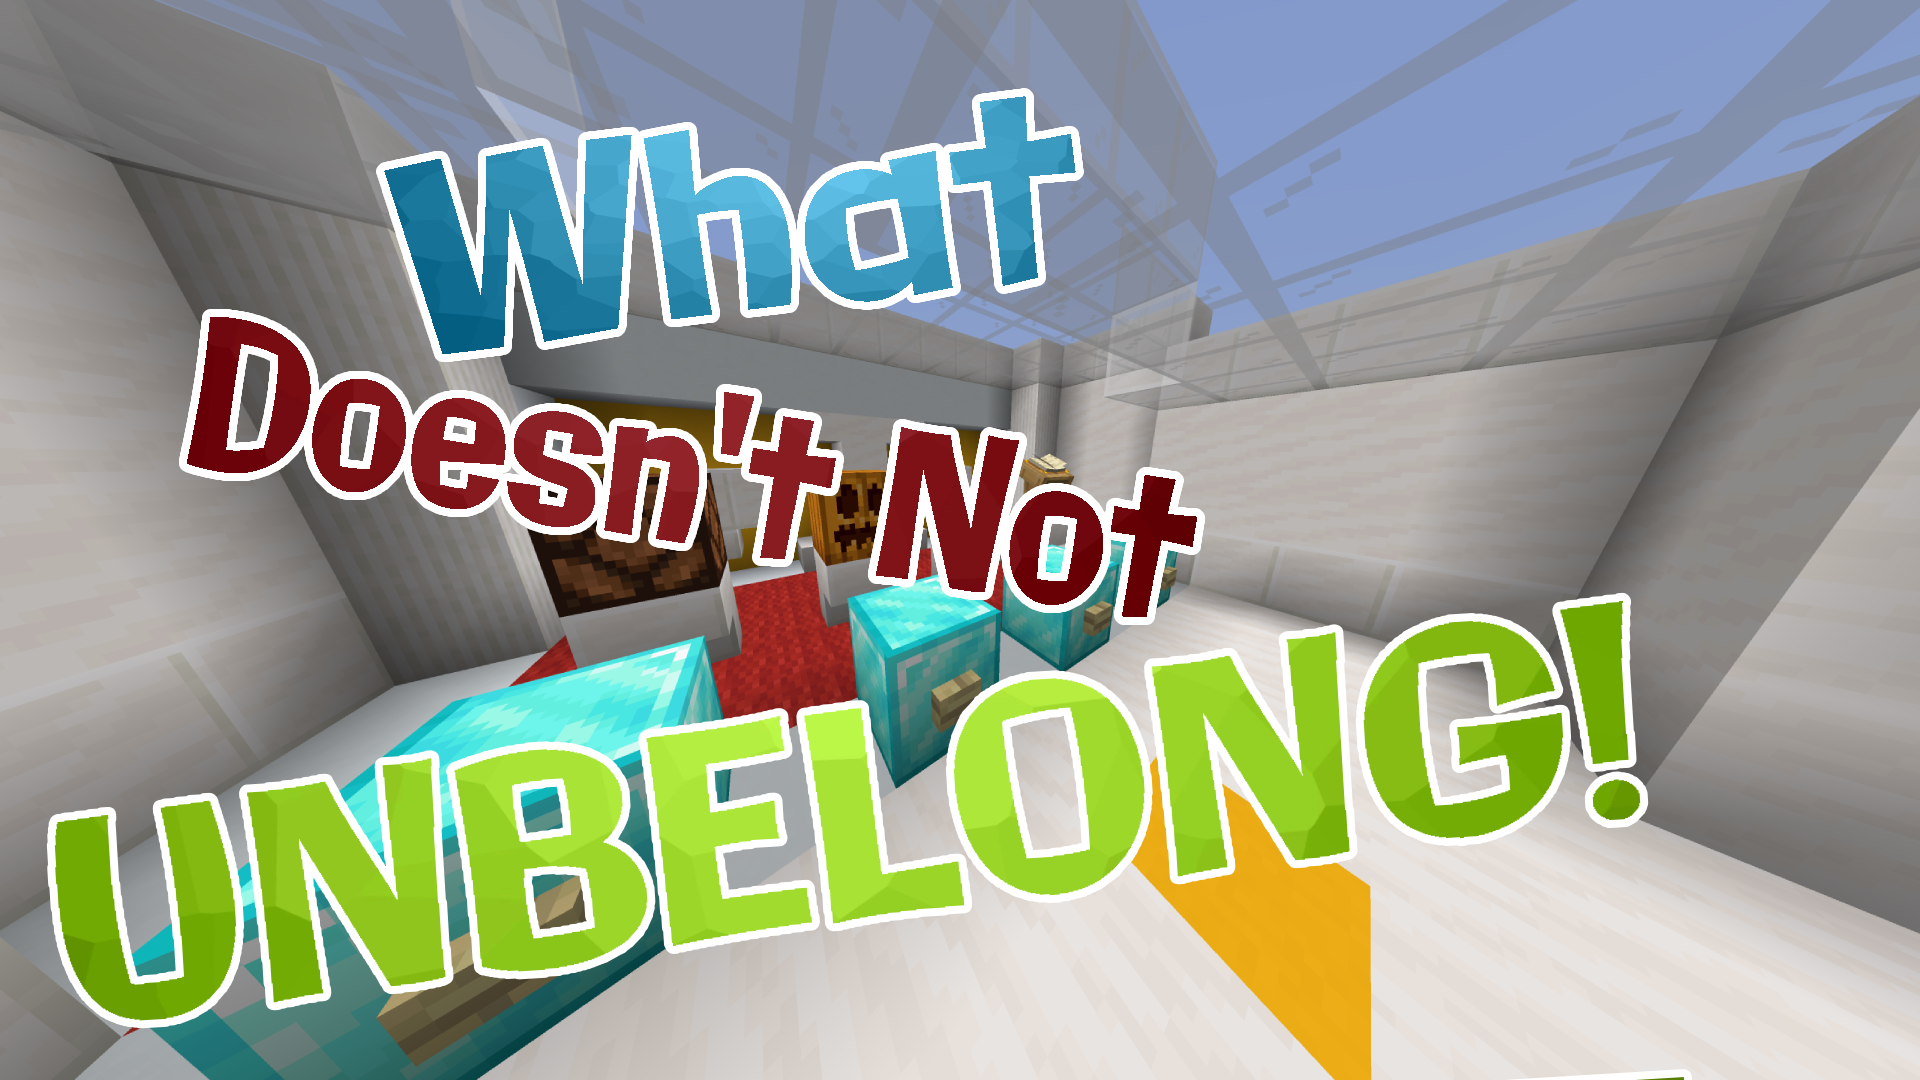 Download What Doesn't Not Unbelong! for Minecraft 1.14.1